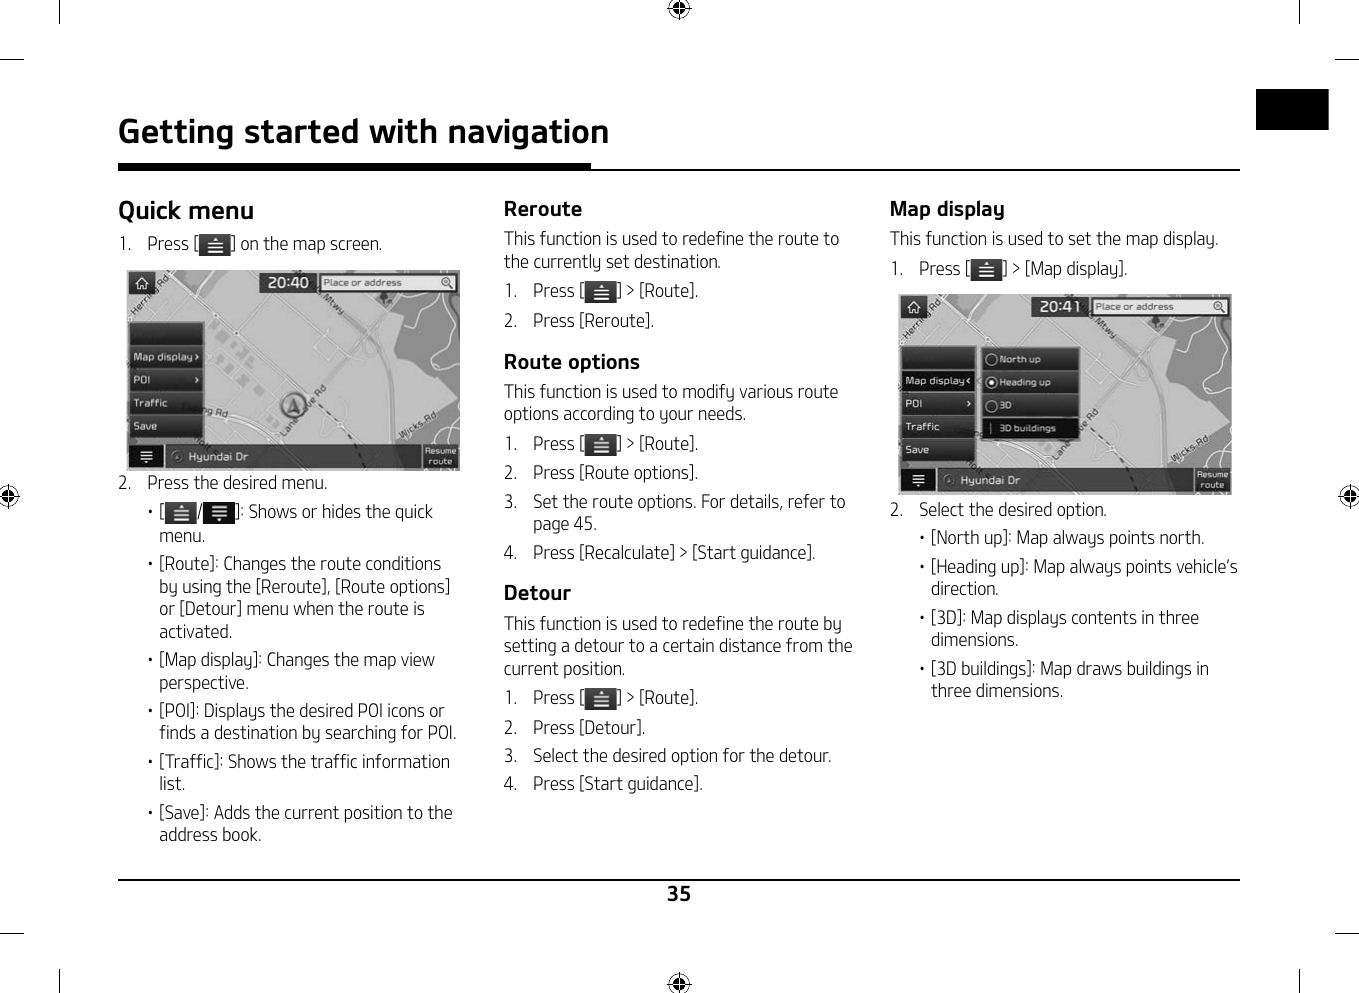 35Getting started with navigationQuick menu1.  Press [ ] on the map screen. 2.  Press the desired menu.䳜 [ / ]: Shows or hides the quick menu.䳜 [Route]: Changes the route conditions by using the [Reroute], [Route options] or [Detour] menu when the route is activated.䳜 [Map display]: Changes the map view perspective.䳜 [POI]: Displays the desired POI icons or finds a destination by searching for POI.䳜 [Traffic]: Shows the traffic information list.䳜 [Save]: Adds the current position to the address book.RerouteThis function is used to redefine the route to the currently set destination.1.   Press [ ] &gt; [Route].2.  Press [Reroute].Route optionsThis function is used to modify various route options according to your needs.1.   Press [ ] &gt; [Route].2.  Press [Route options].3.  Set the route options. For details, refer to page 45.4.  Press [Recalculate] &gt; [Start guidance].DetourThis function is used to redefine the route by setting a detour to a certain distance from the current position.1.   Press [ ] &gt; [Route].2.  Press [Detour].3.  Select the desired option for the detour.4.   Press [Start guidance].Map displayThis function is used to set the map display.1.   Press [ ] &gt; [Map display].2.  Select the desired option.䳜 [North up]: Map always points north.䳜 [Heading up]: Map always points vehicle䳓s direction.䳜 [3D]: Map displays contents in three dimensions.䳜 [3D buildings]: Map draws buildings in three dimensions.